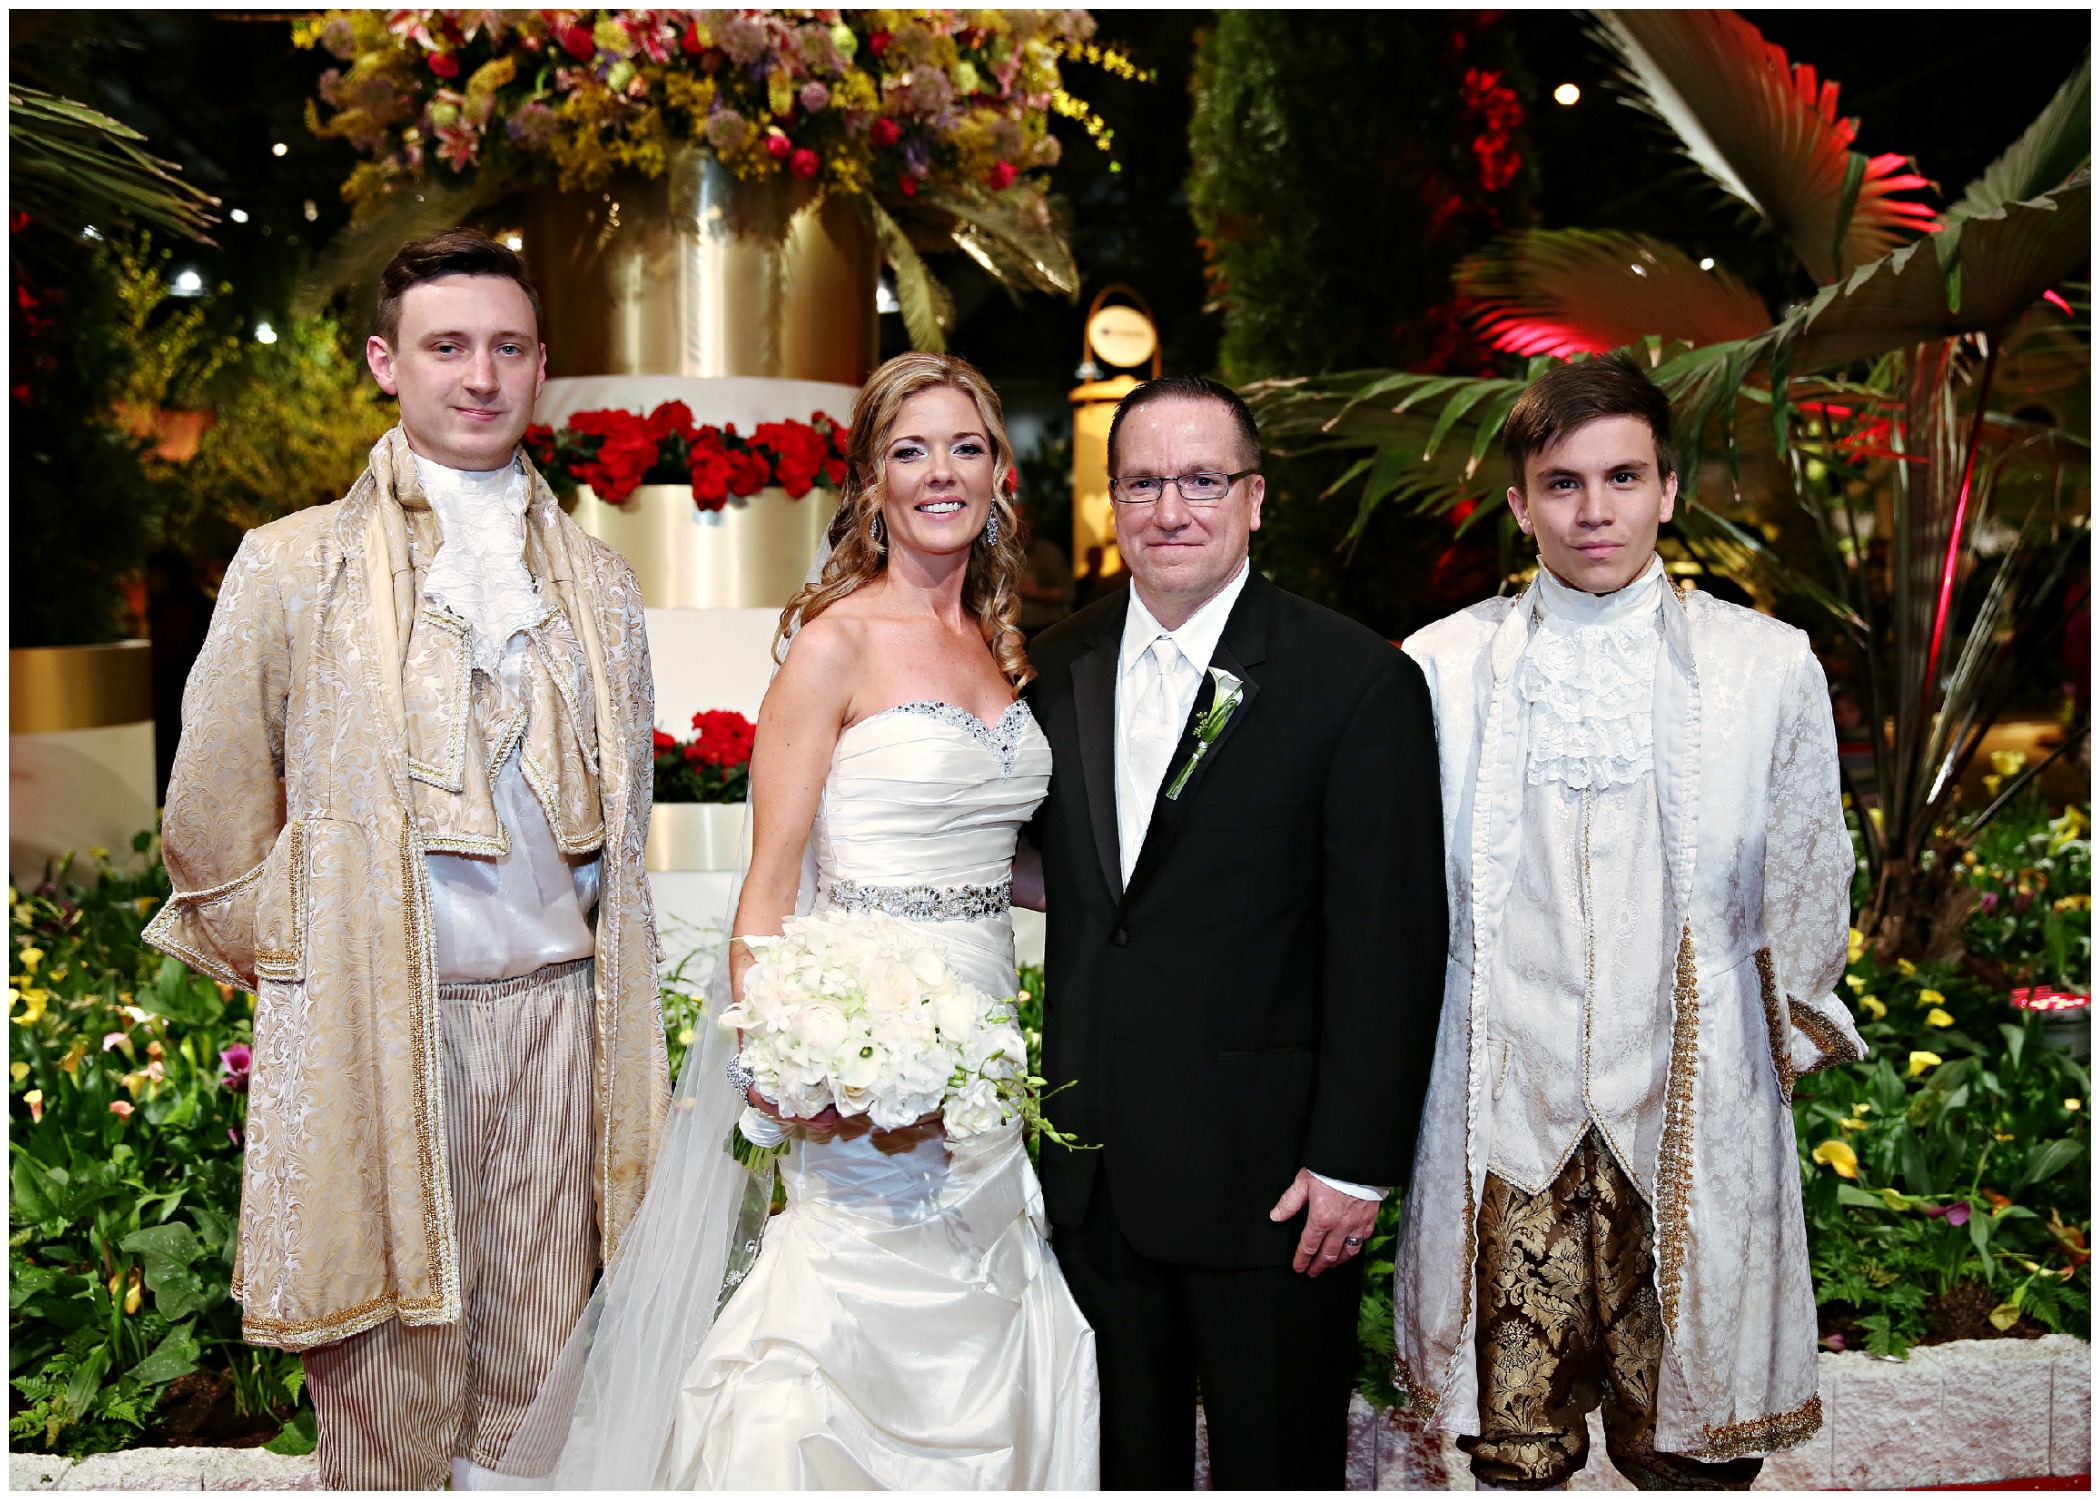 Royal Escorts Pose with The Bride & Groom After the Ceremony